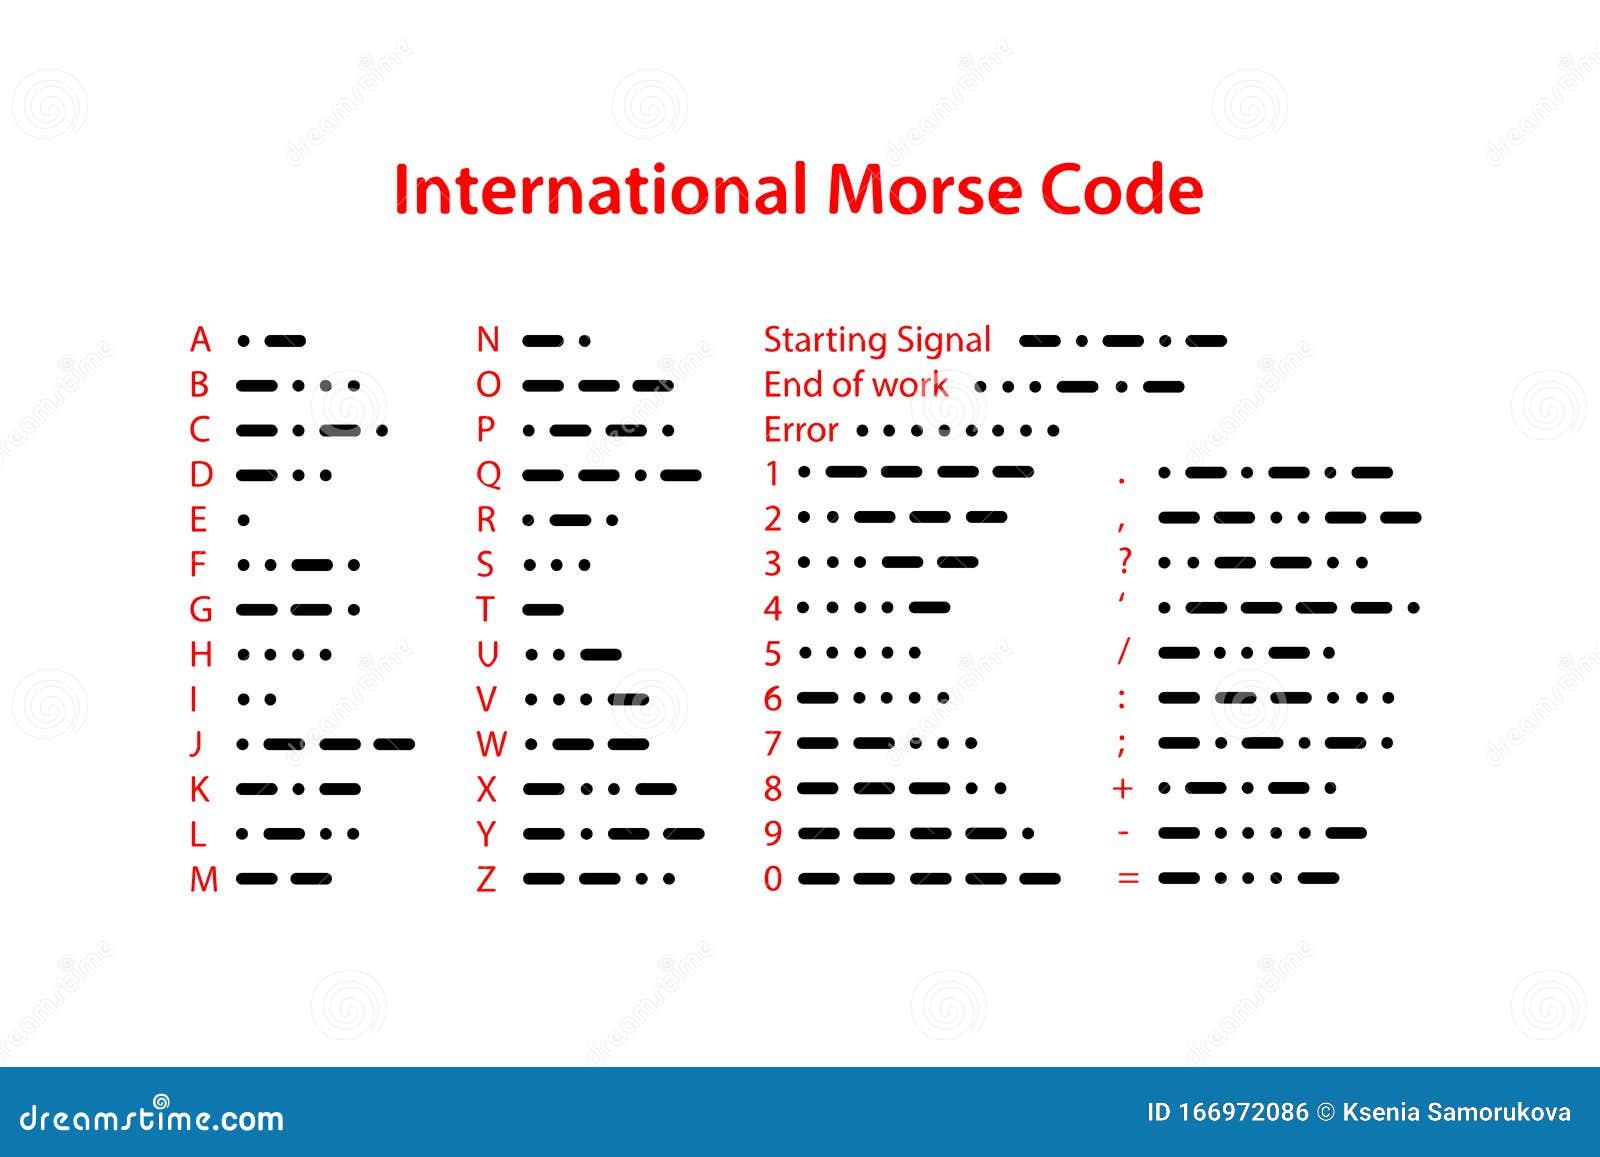 Morse Code Alphabet And Numbers Chart.pdf